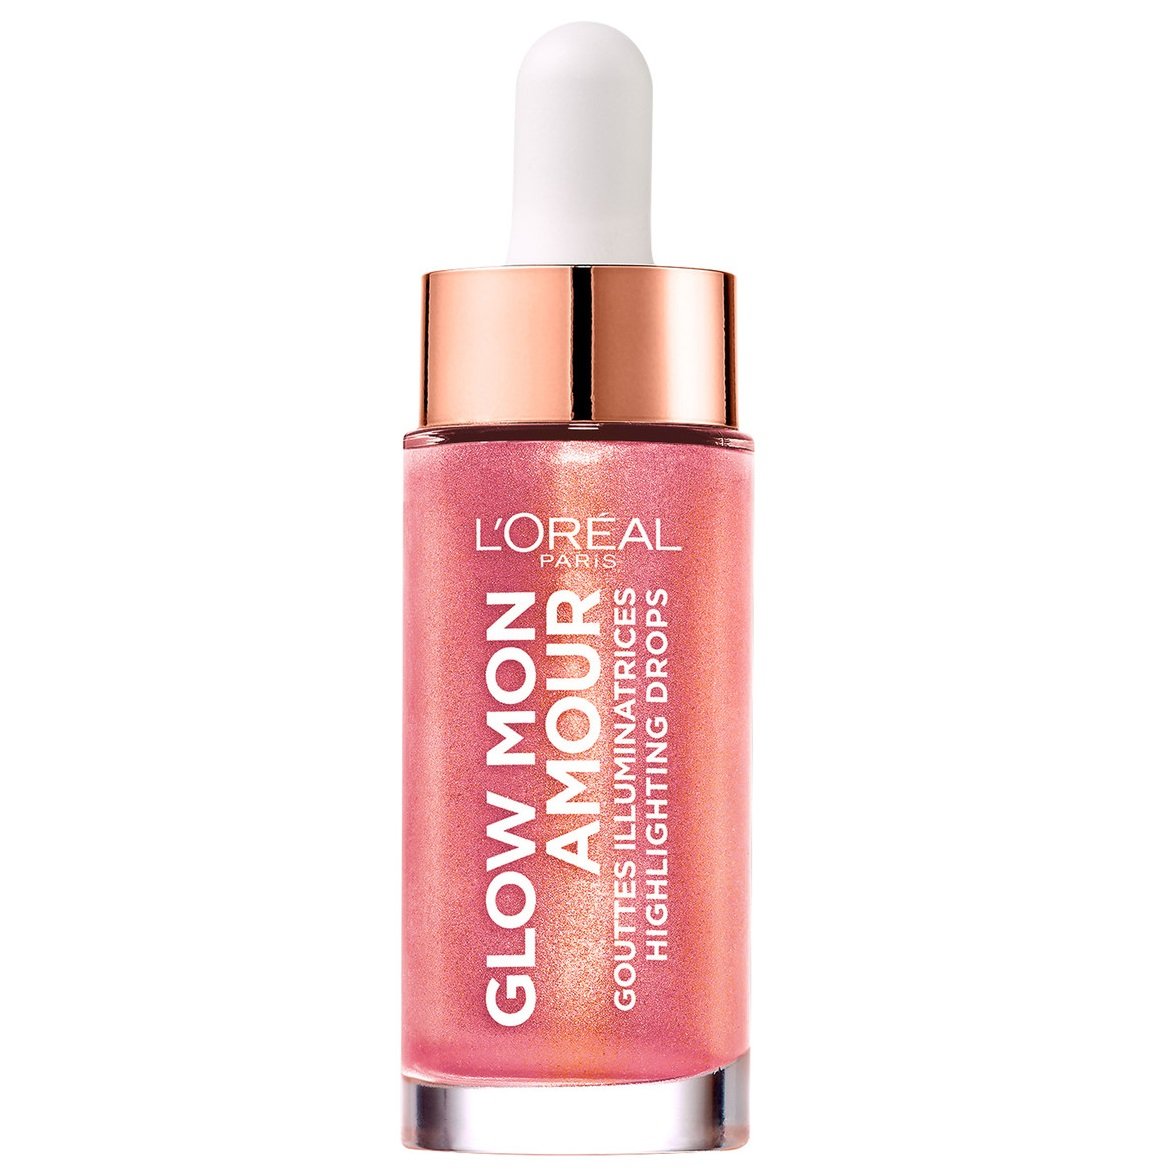 L'OREAL Wake Up And Glow Highlighting Drops - Melon Berry #04